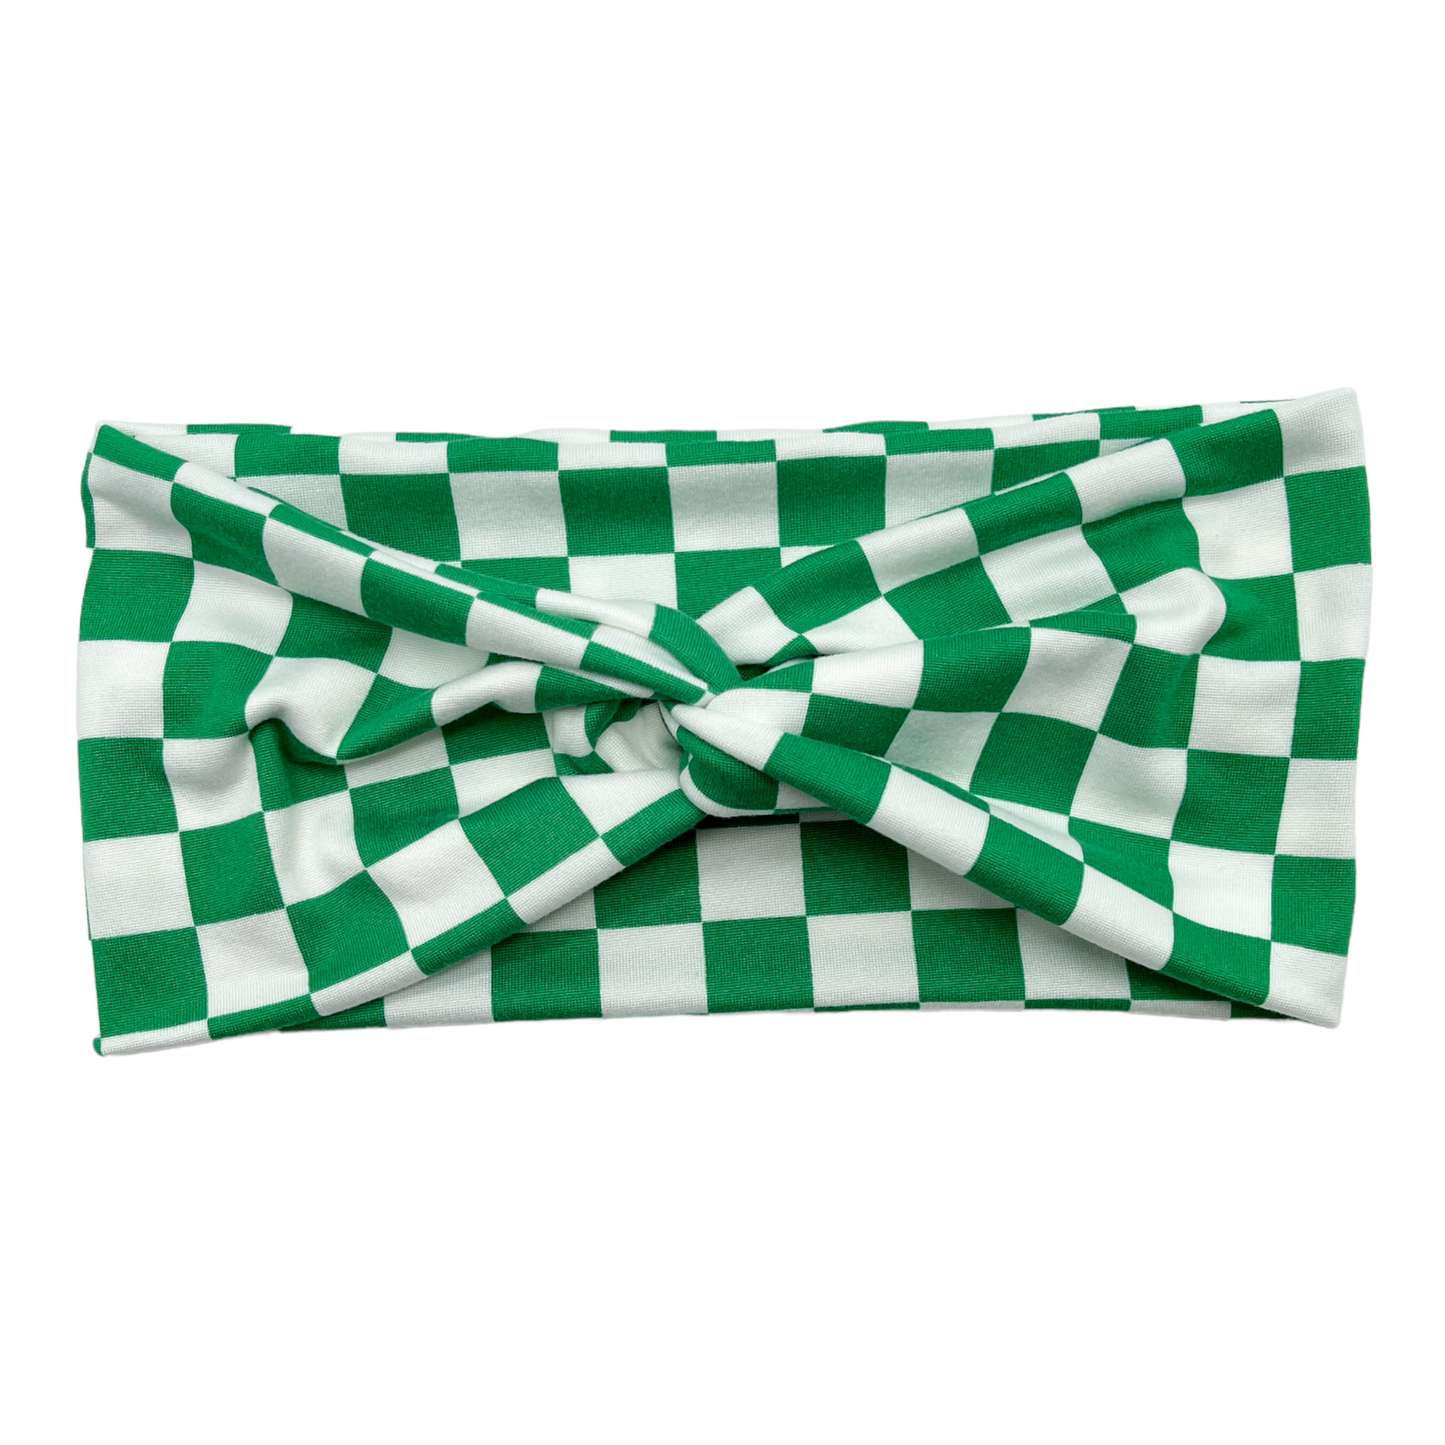 GREEN & WHITE CHECKERS - FRONT KNOT